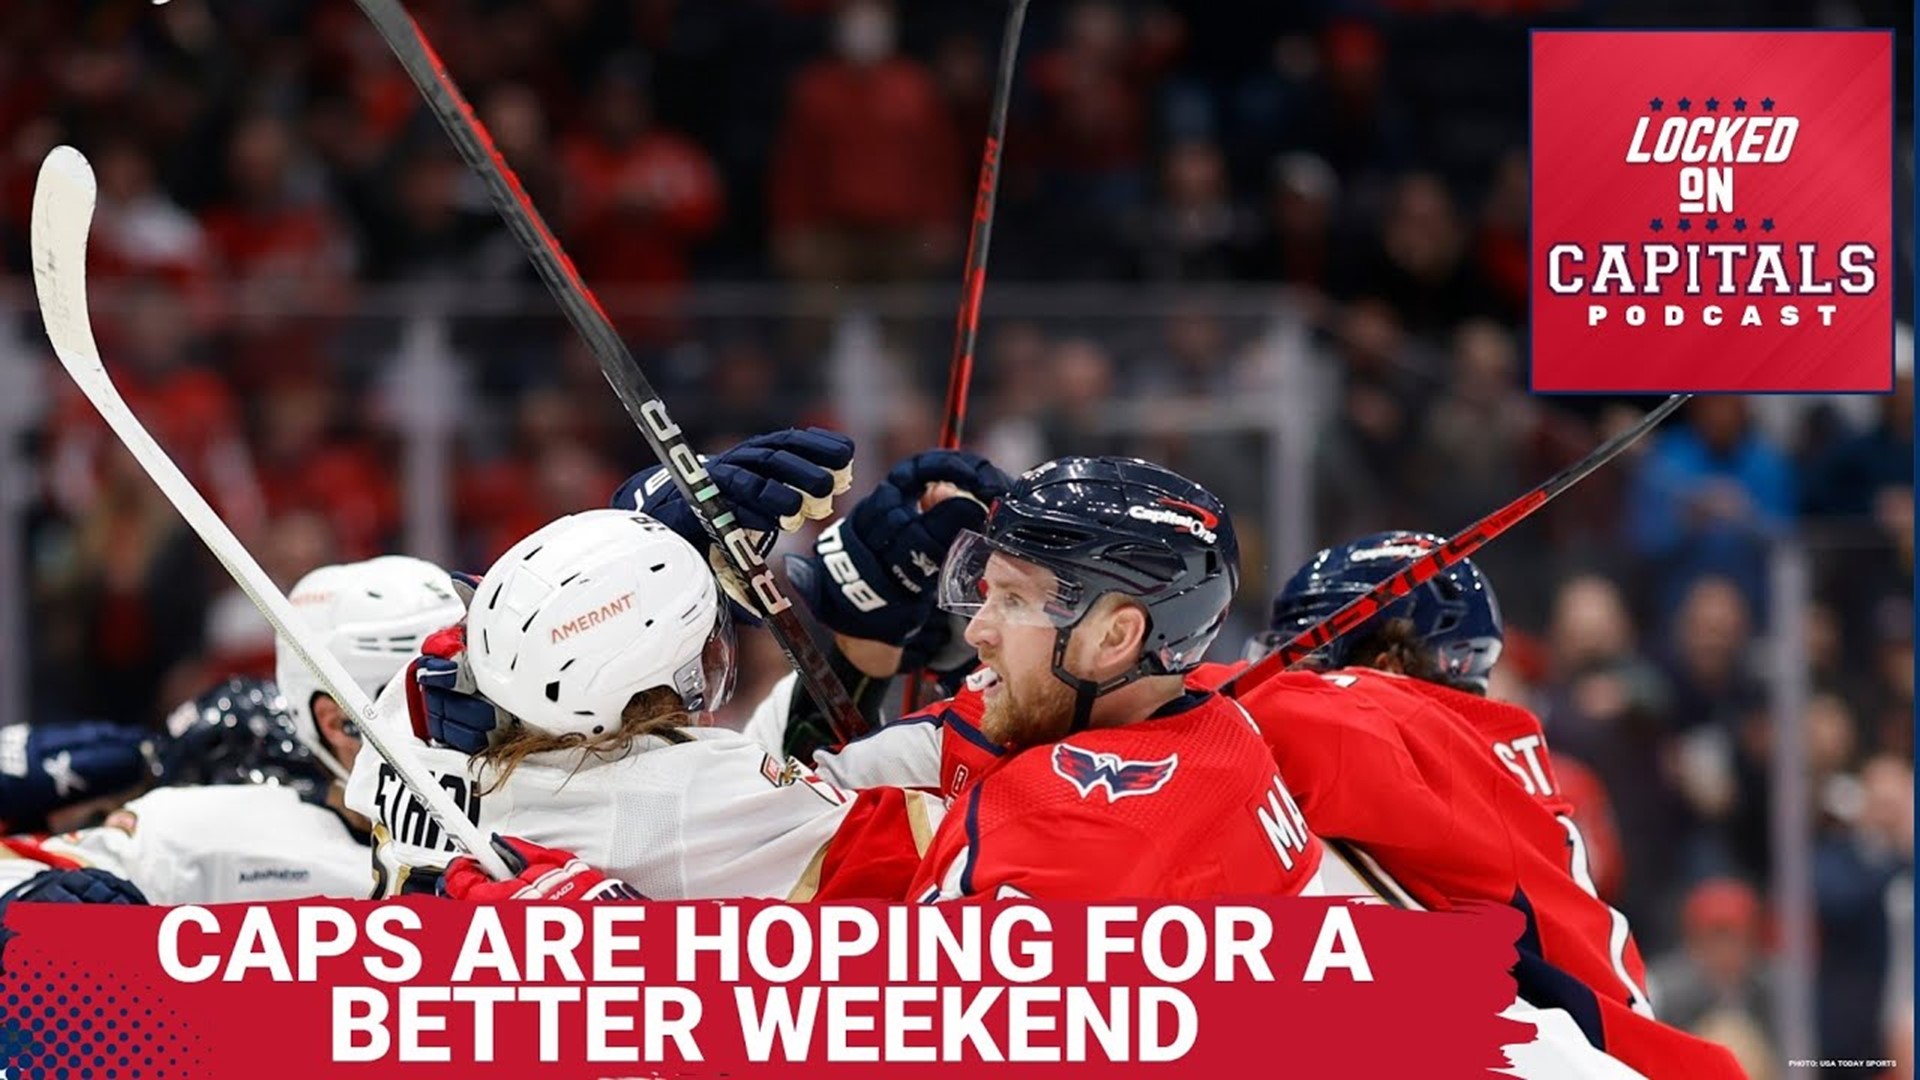 In this edition of Locked on Capitals Dan talks about the Capitals loss to the Florida Panthers.